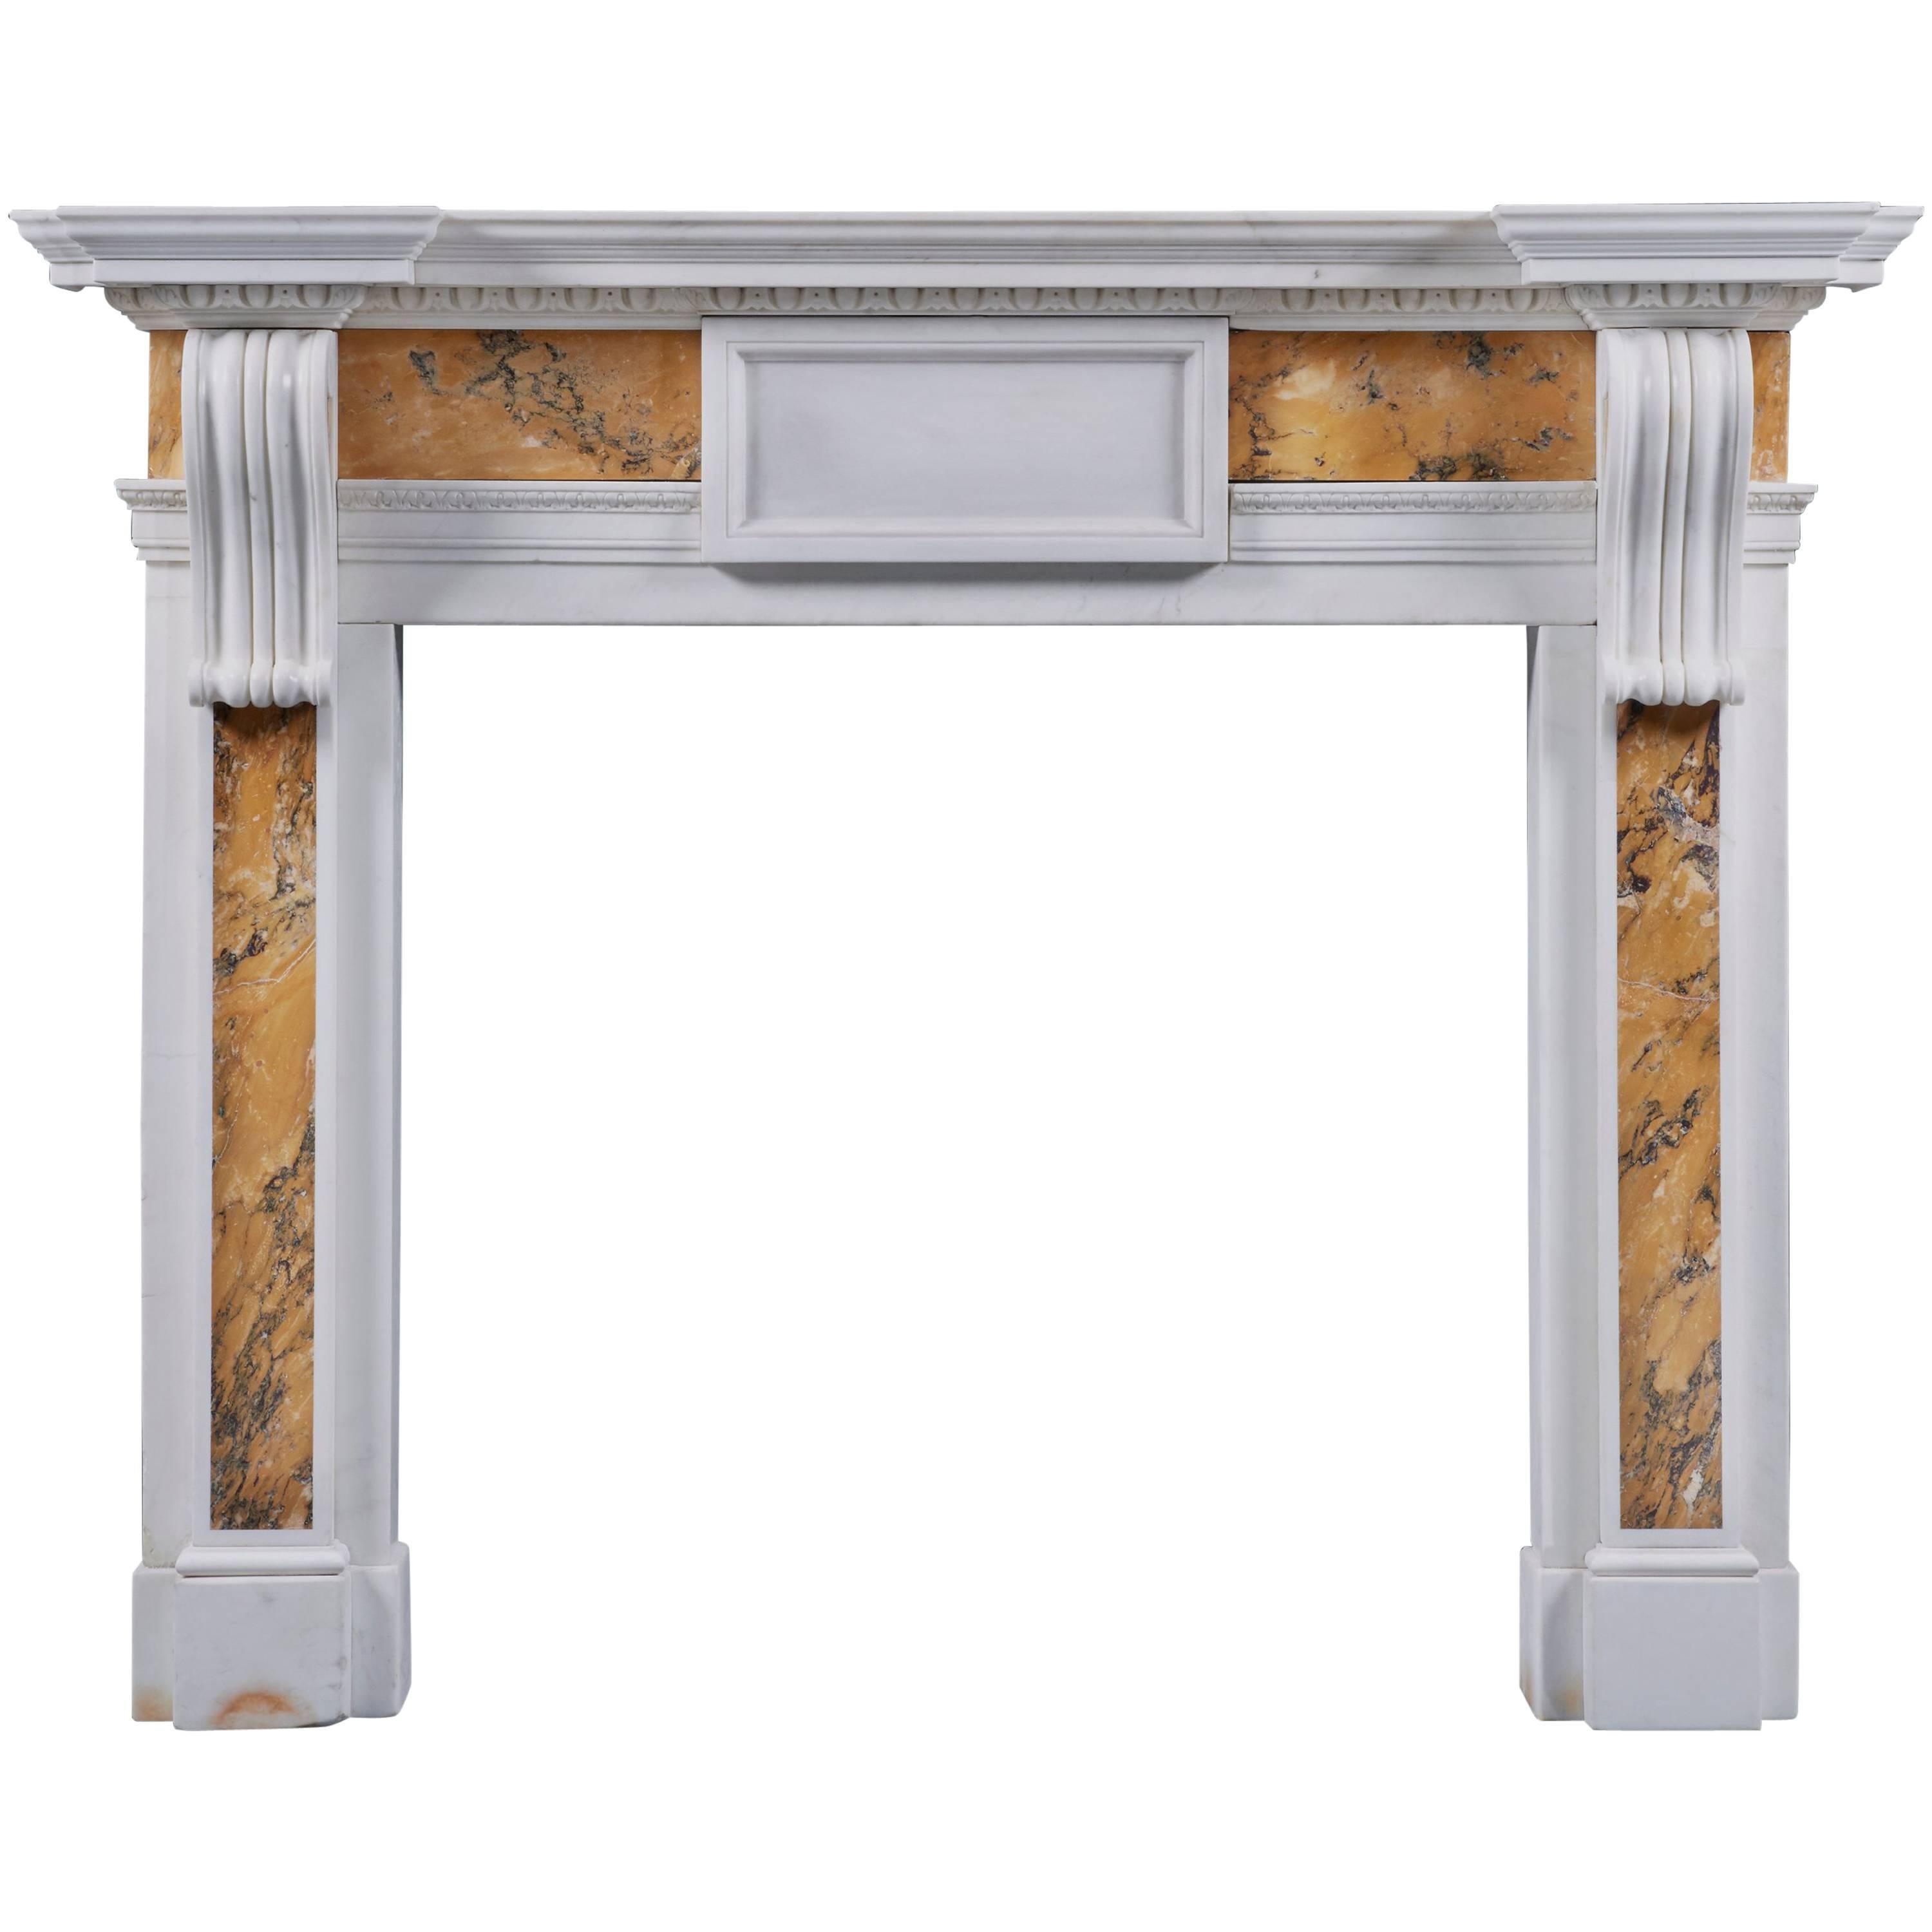 Antique Georgian Corbel Siena and Statuary Marble Fireplace Mantel